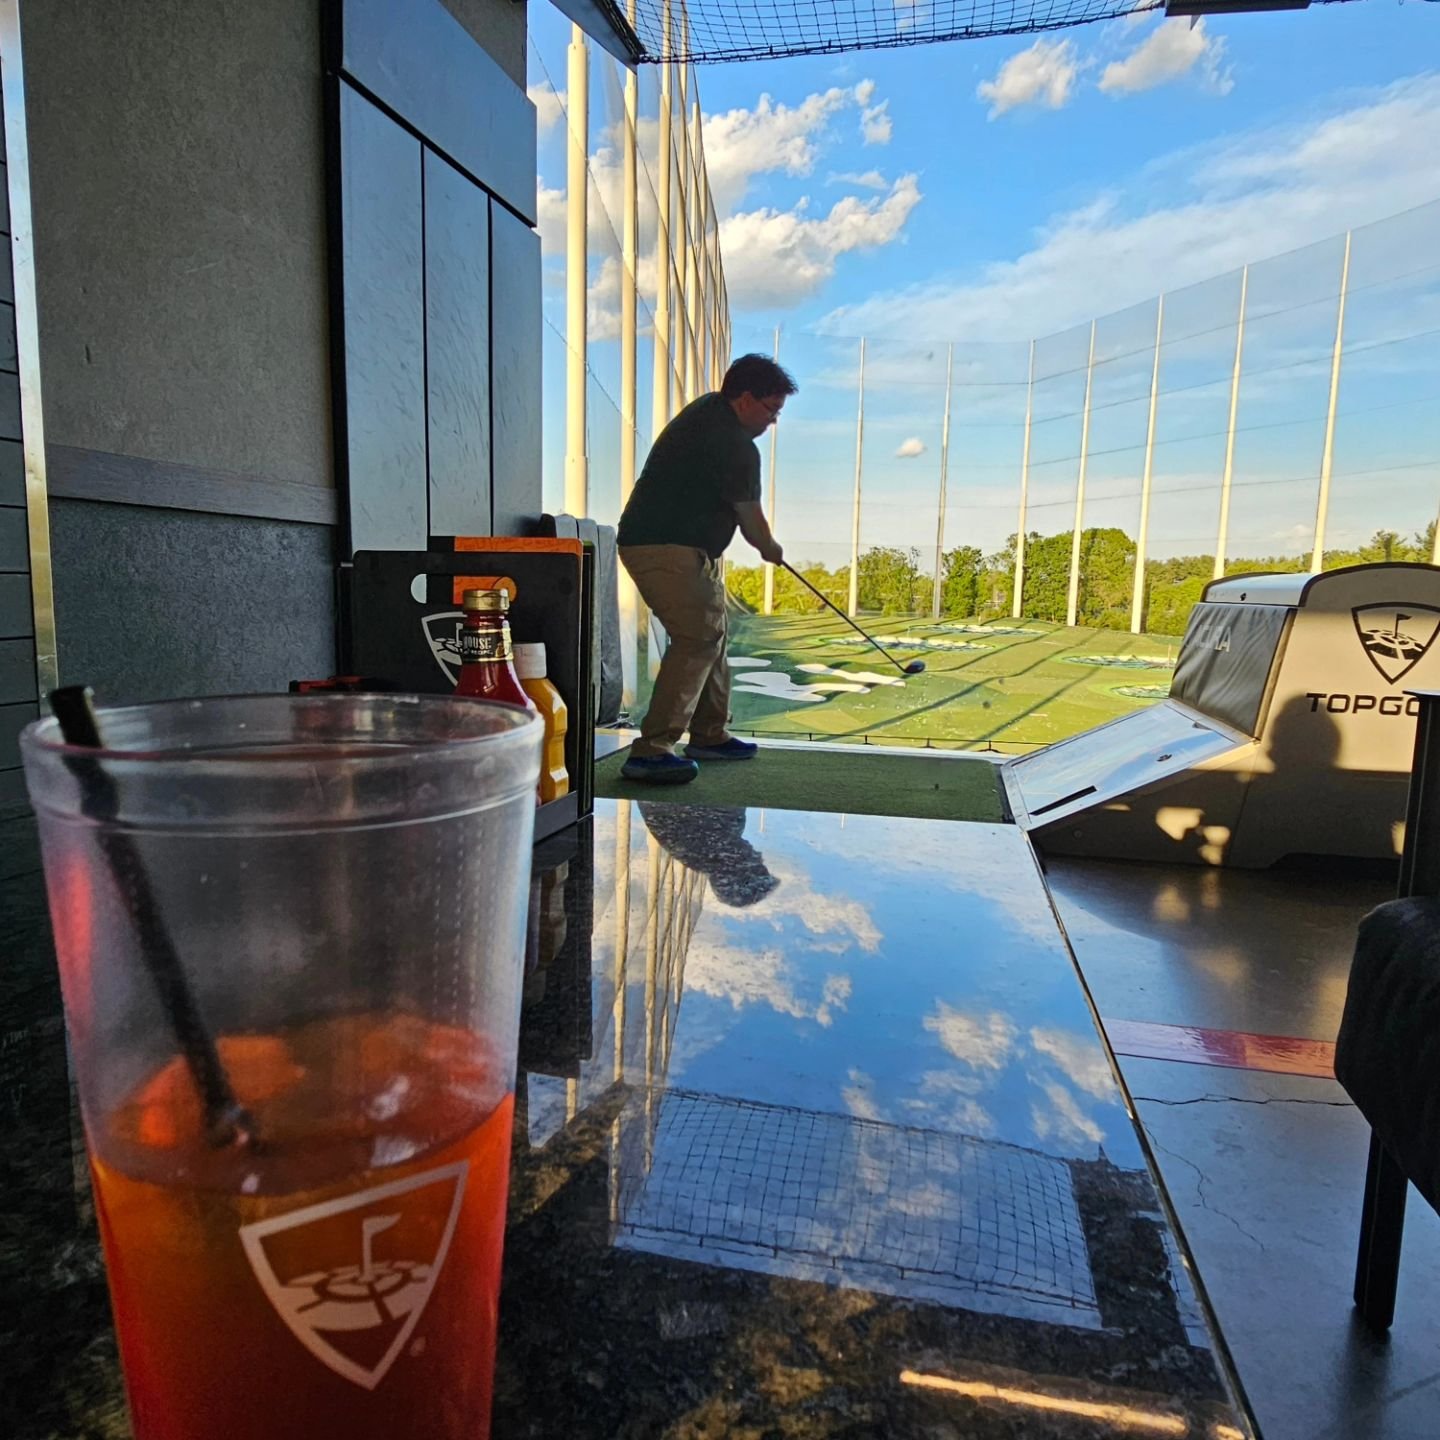 We're serious about top golf ⛳️ 😎 🤣